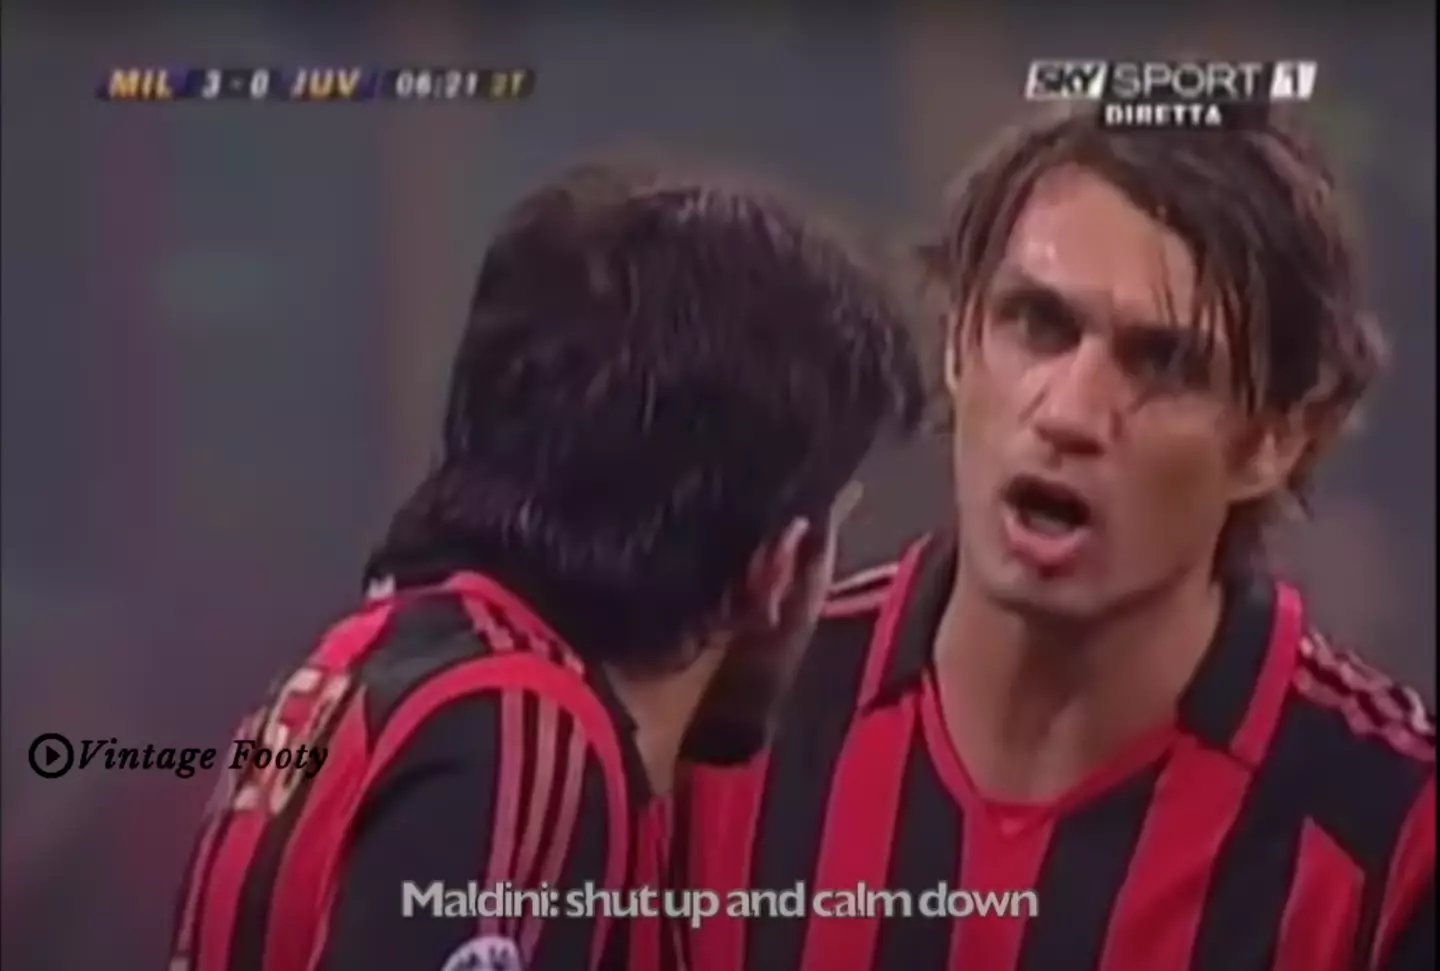 Maldini wasn't taking any excuses from Gattuso. (Image